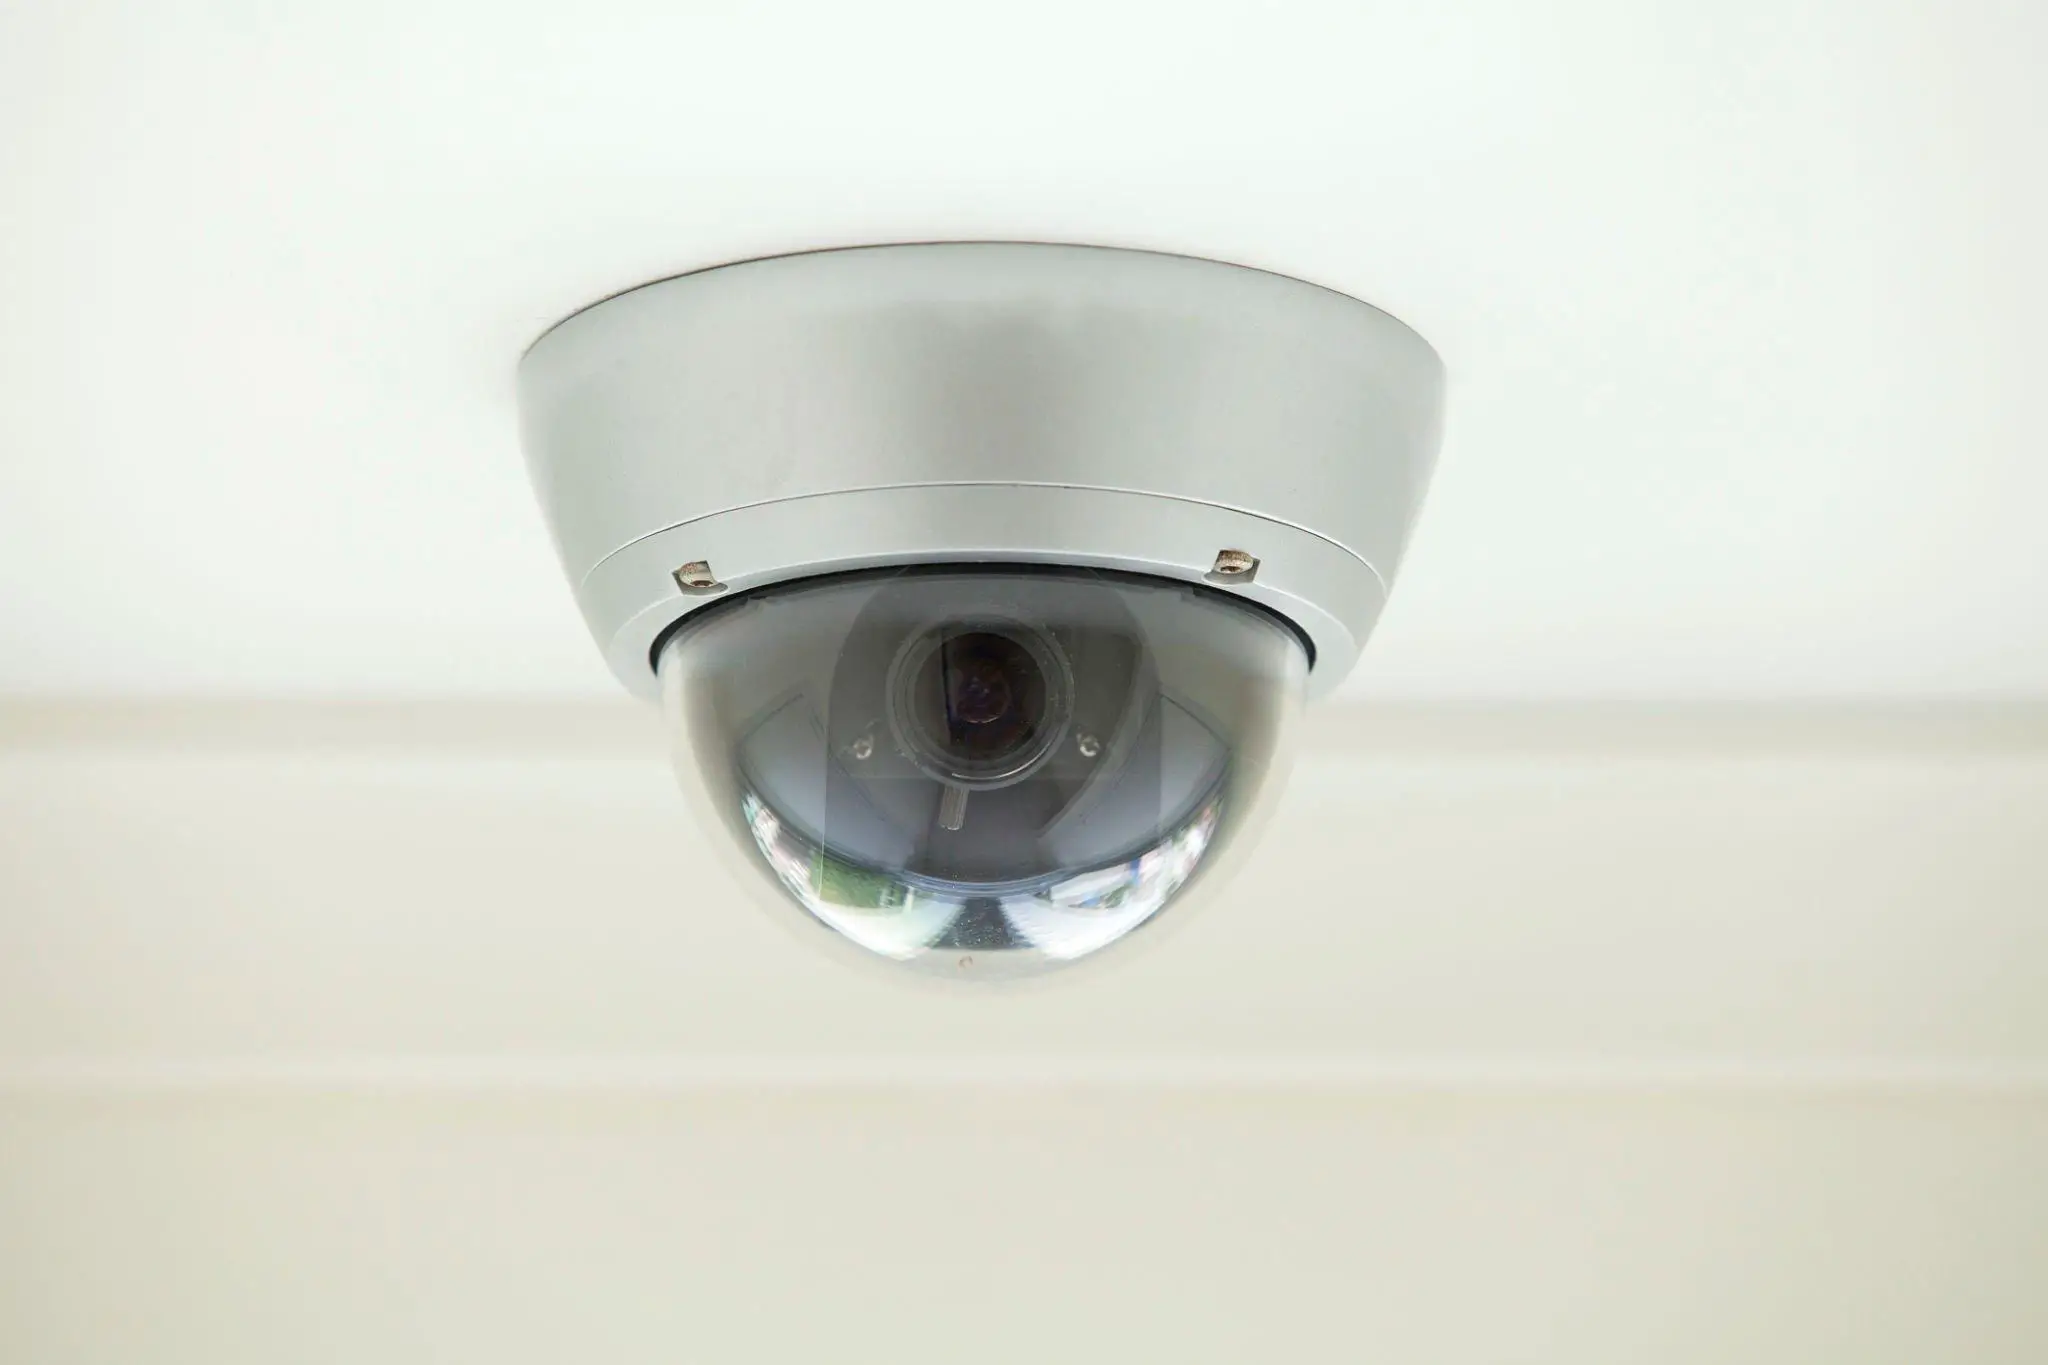 The Truth About Home Security Systems